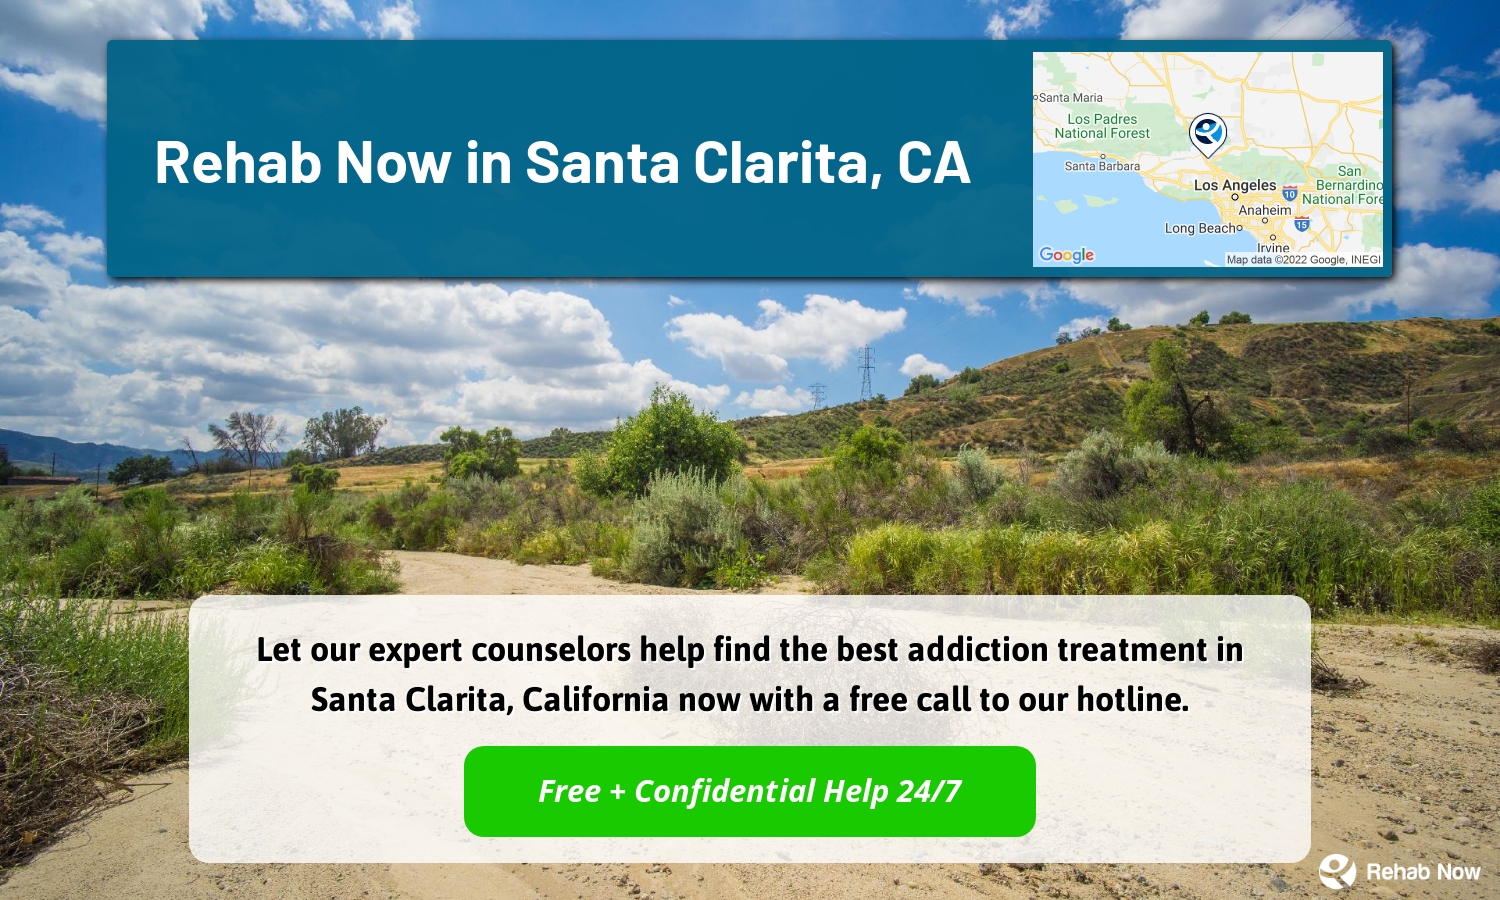 Let our expert counselors help find the best addiction treatment in Santa Clarita, California now with a free call to our hotline.